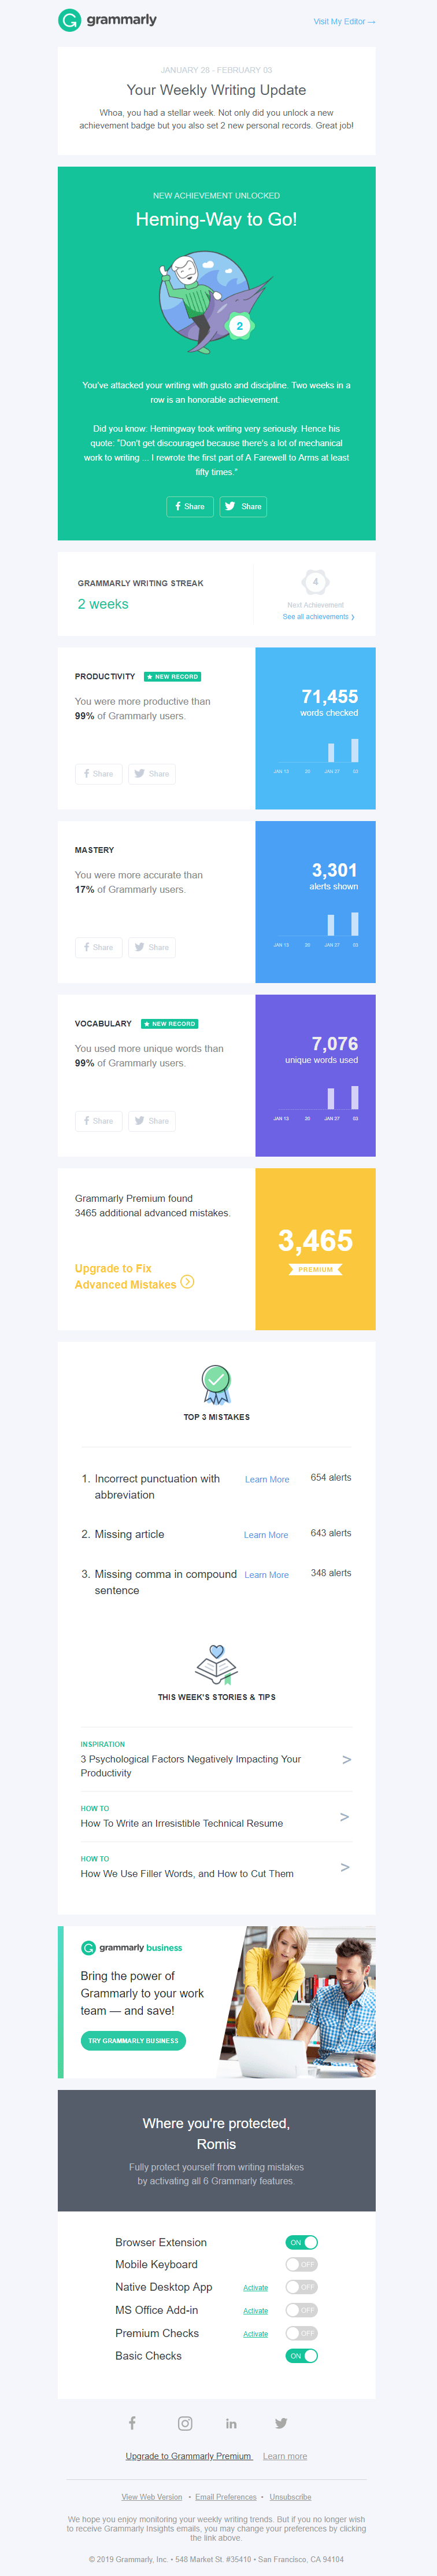 Grammarly's summary email